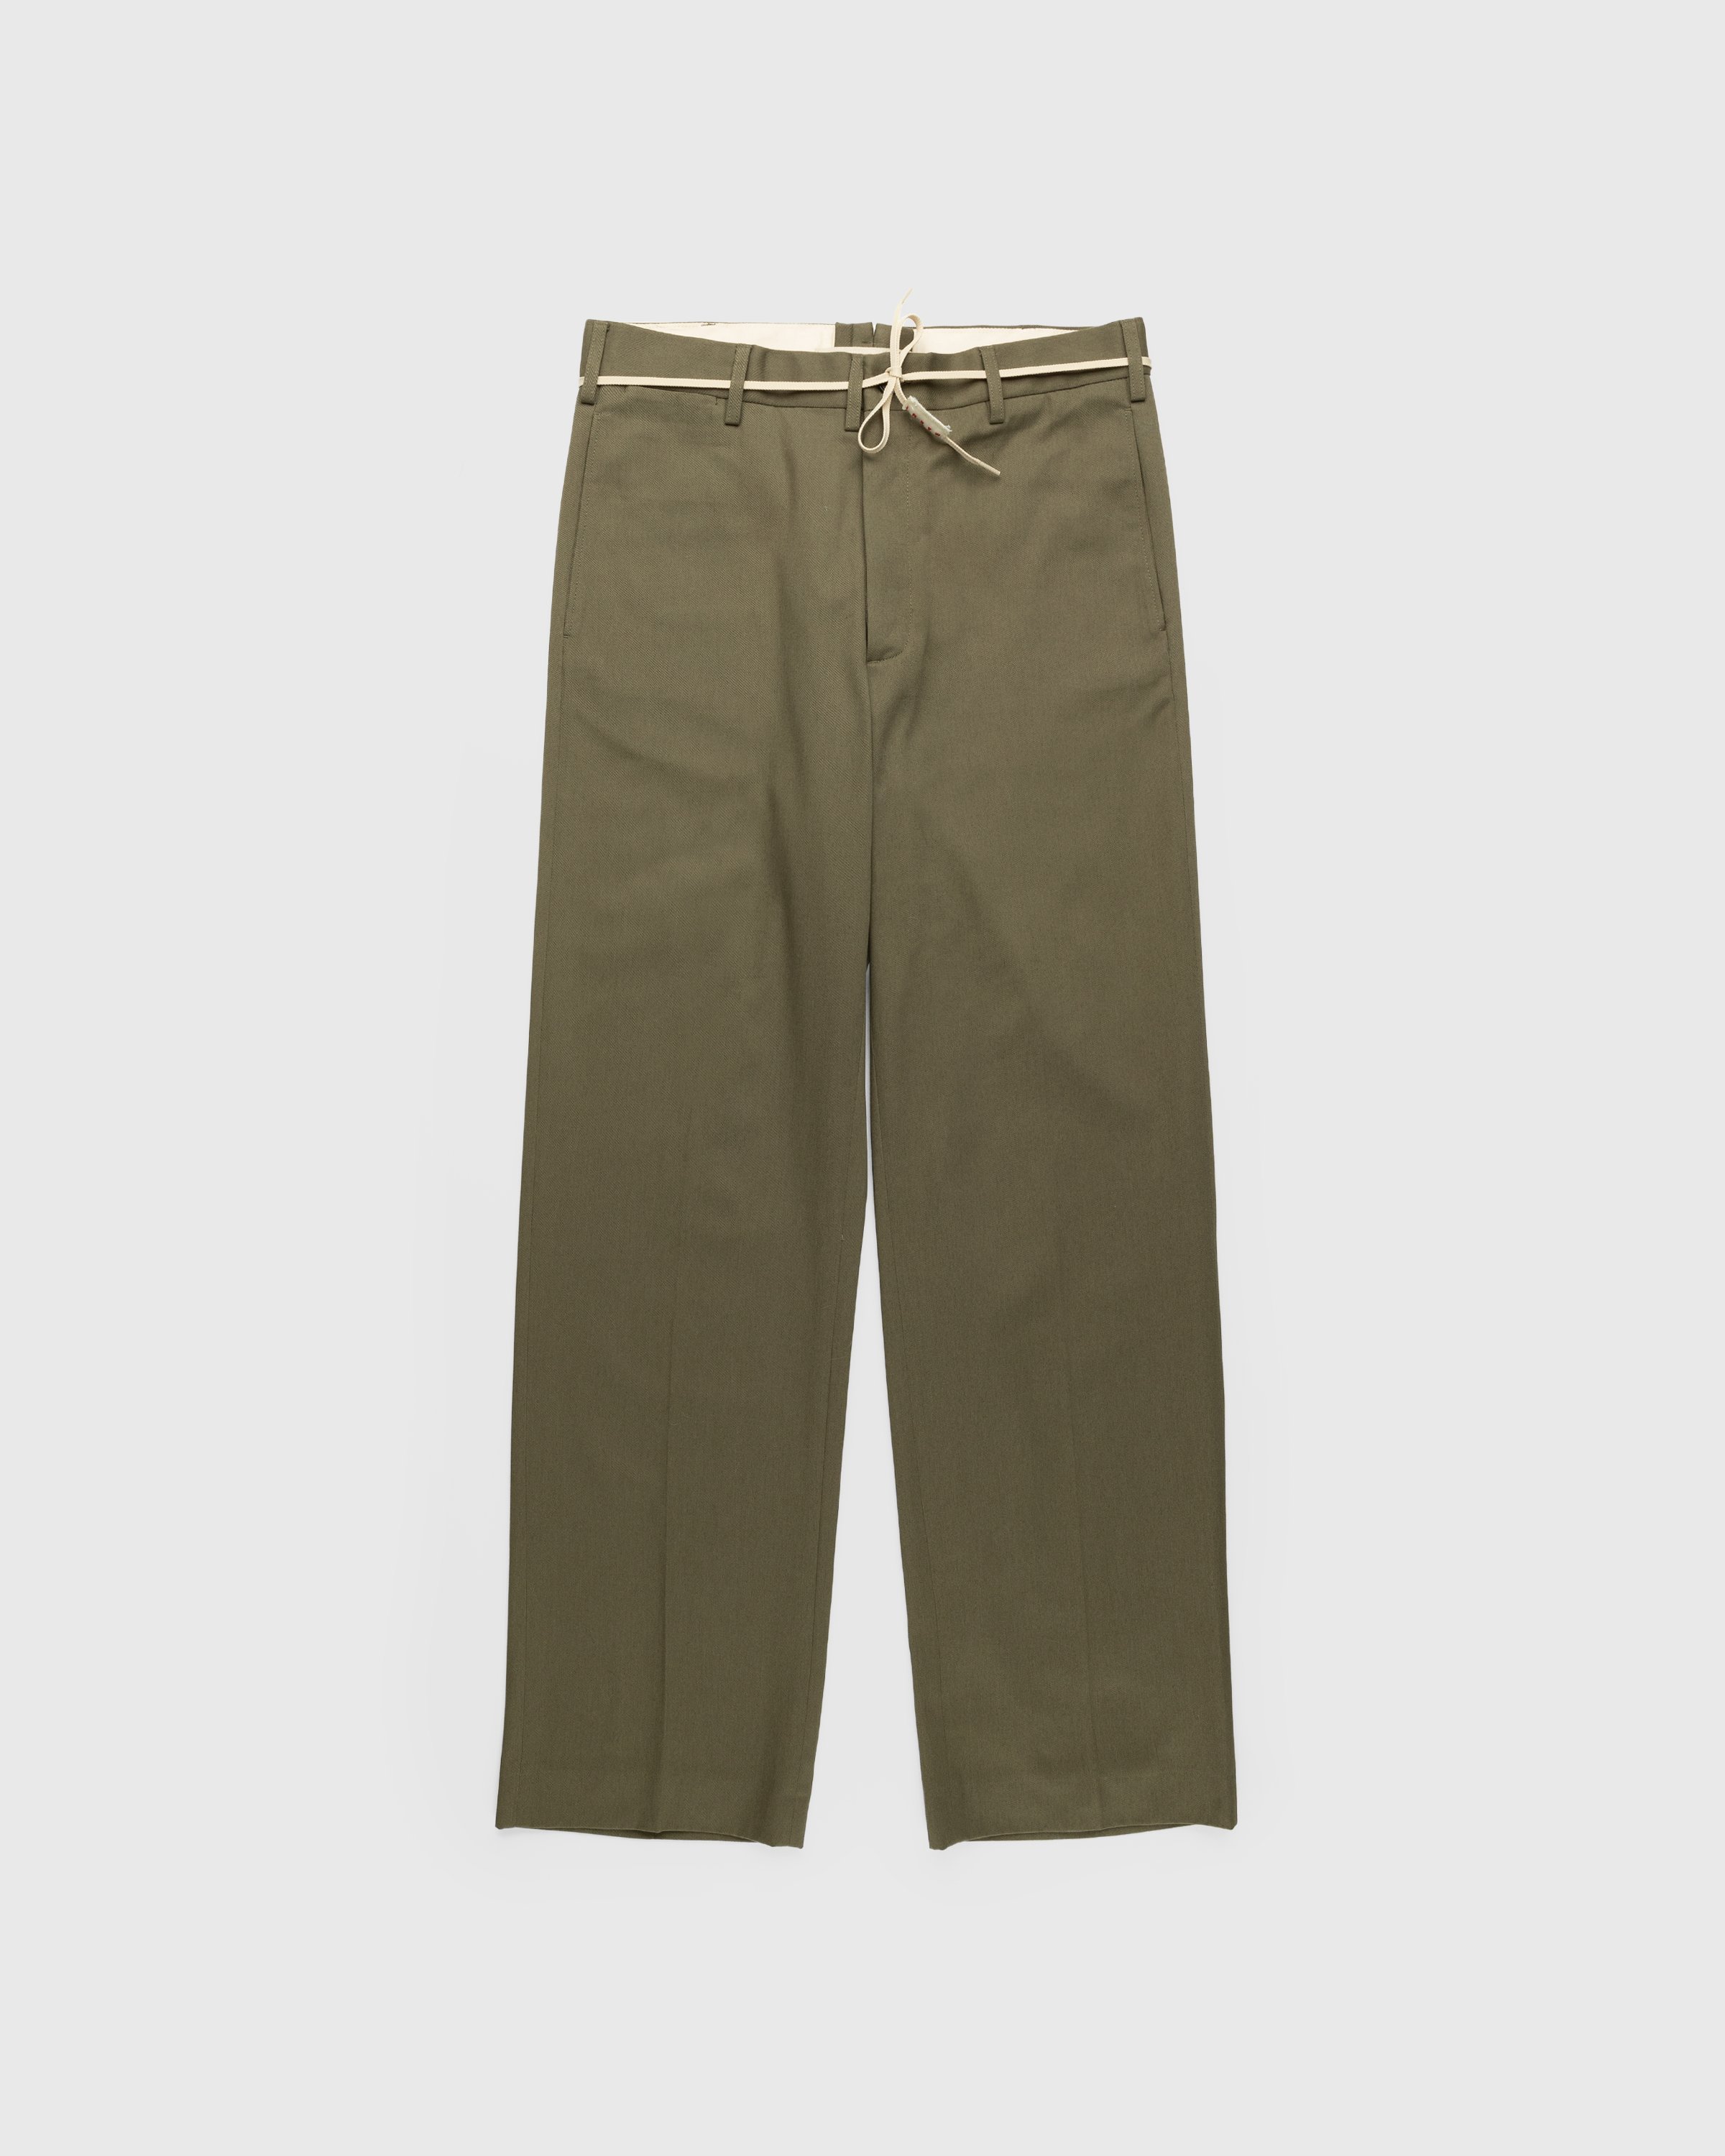 Marni - Gabardine Cotton Cropped Trousers Stone Green - Clothing - Green - Image 1